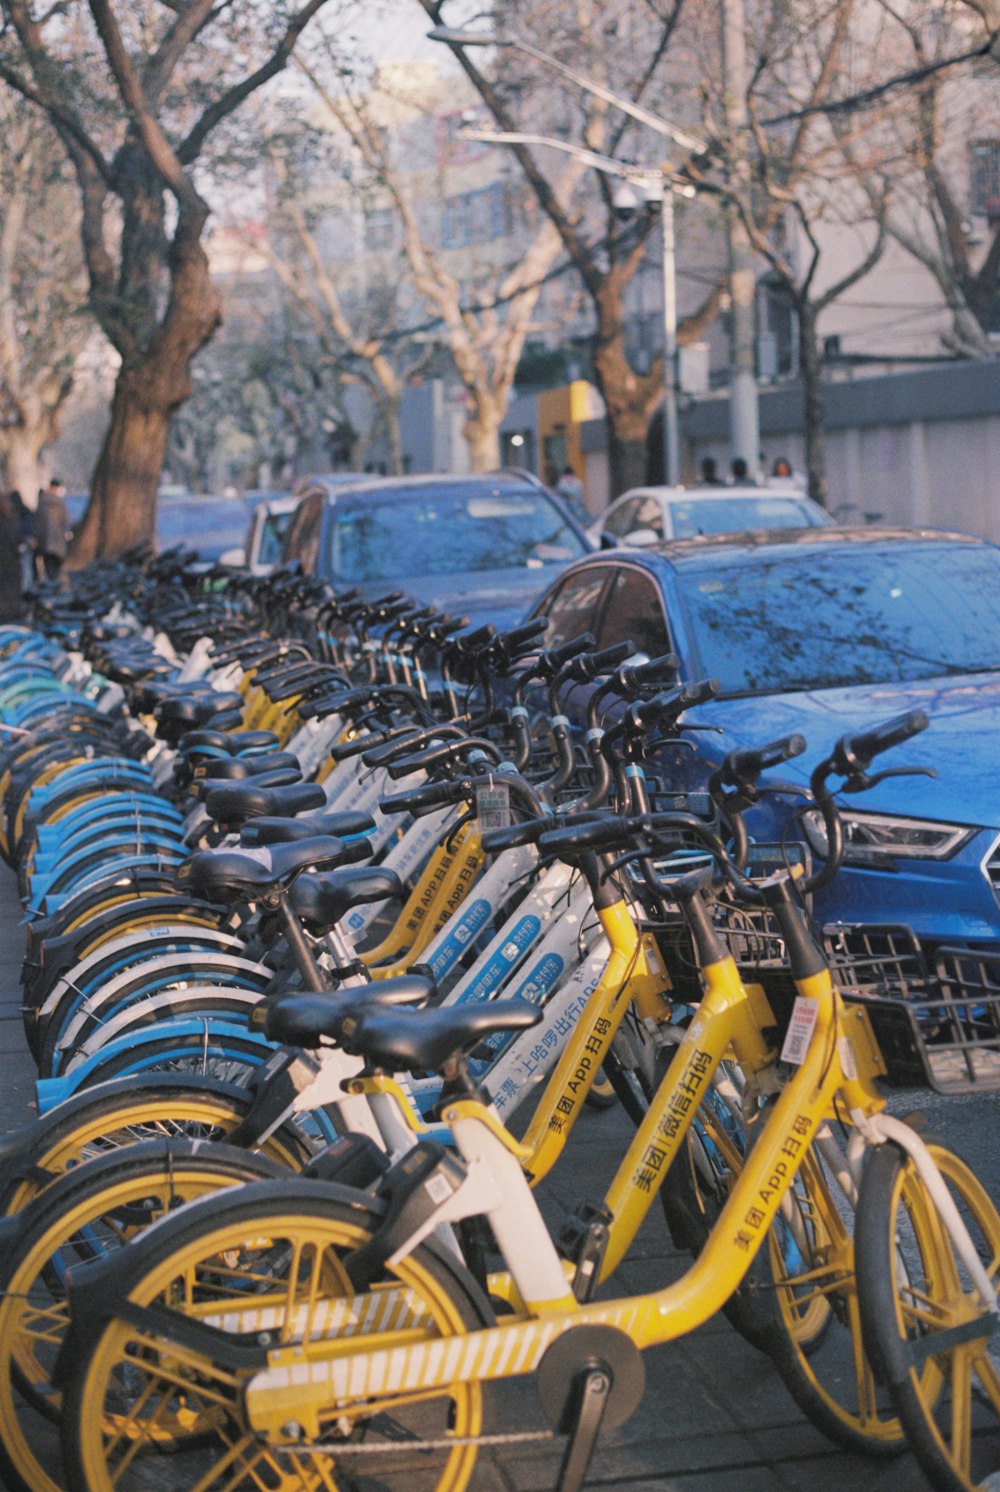 a row of bicycles parked next to each other on a sidewalk